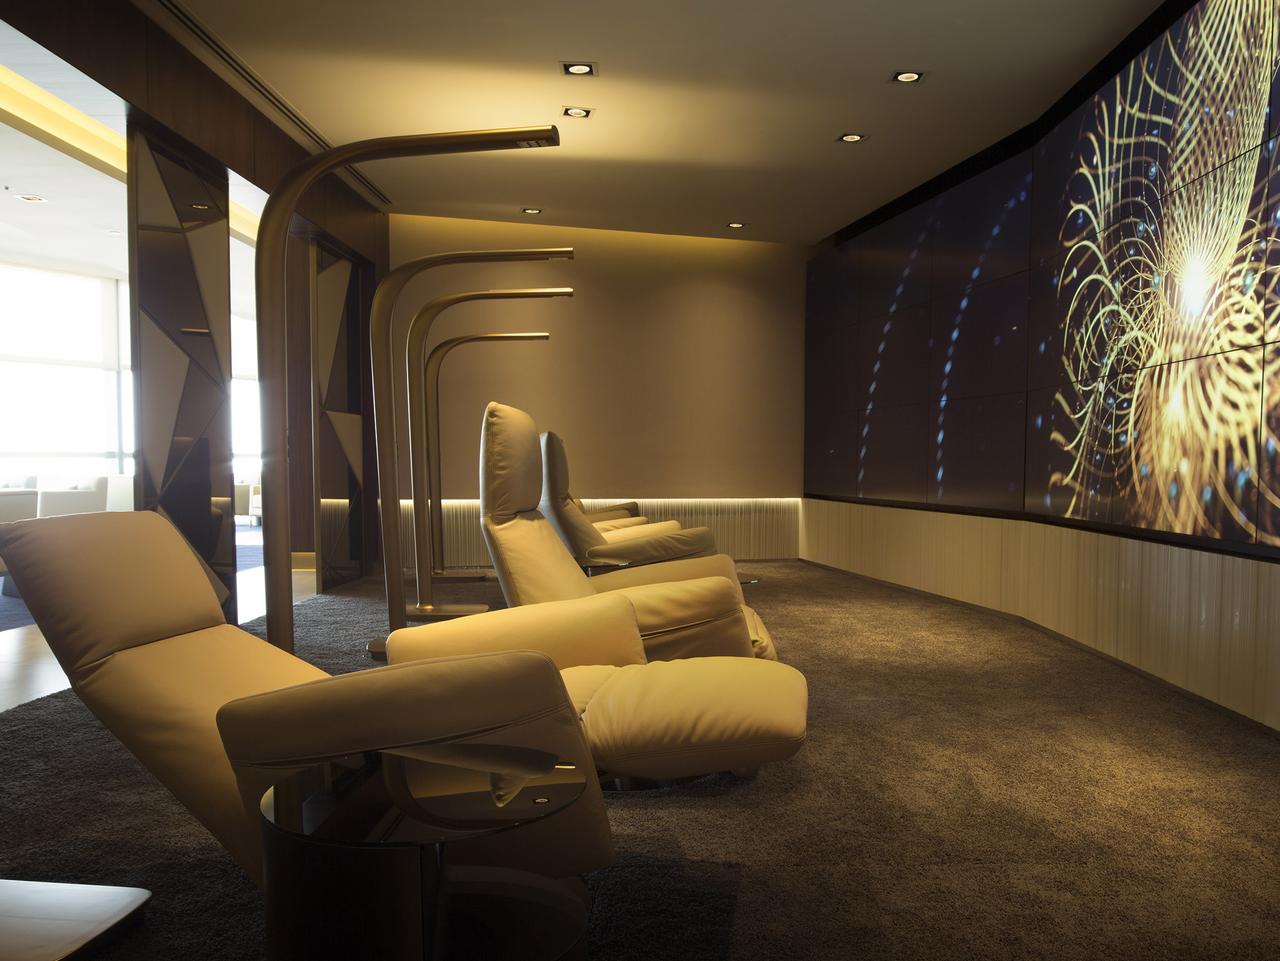 The relaxation room in Etihad’s first class lounge.